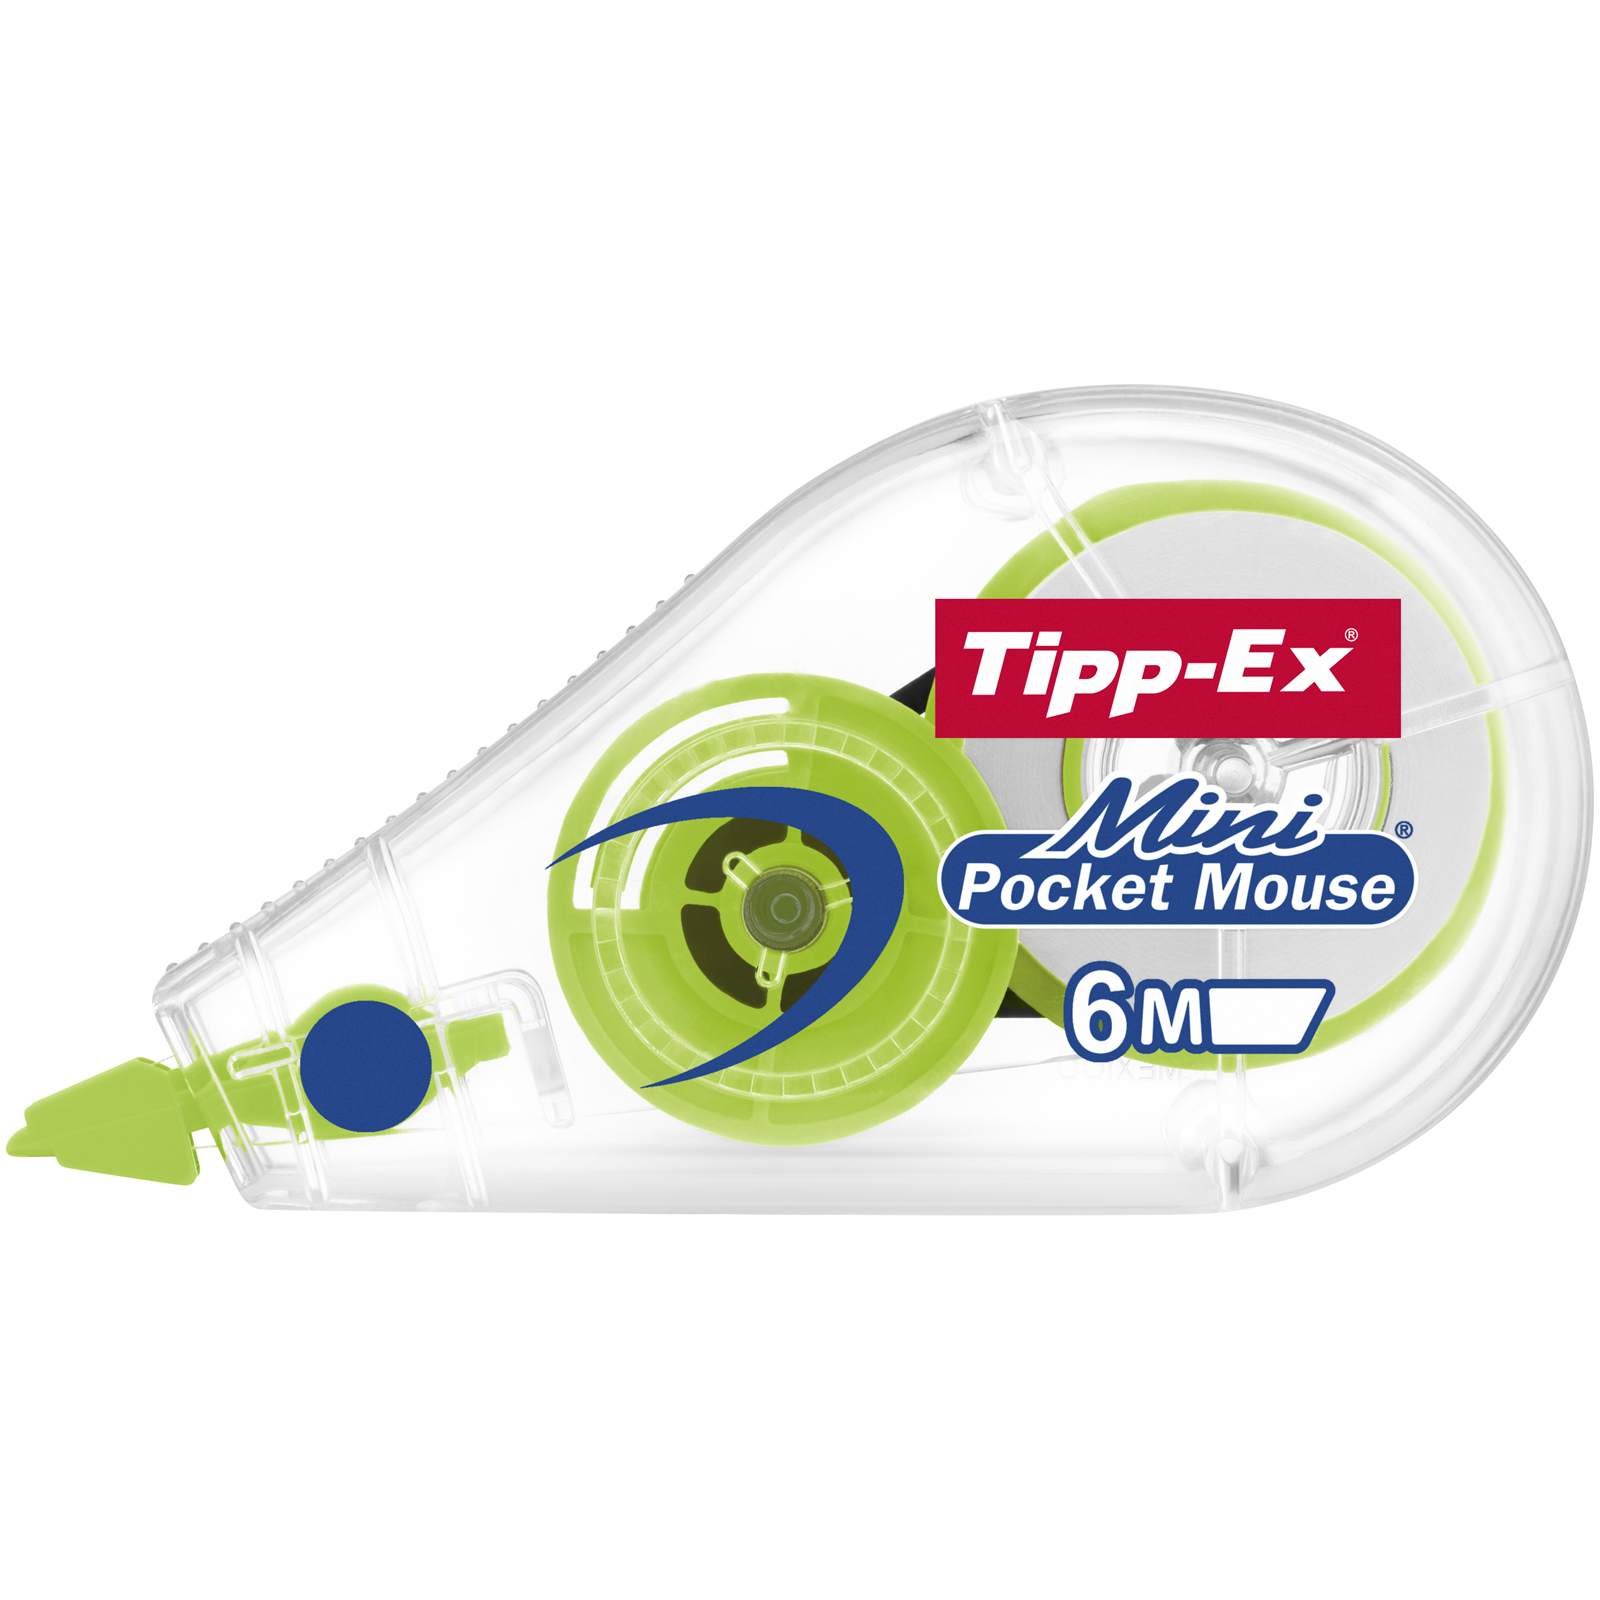 Tipp-Ex Mini Pocket Mouse Correction Tape Roller 5mmx5m Ref 812870 by Tipp  Ex